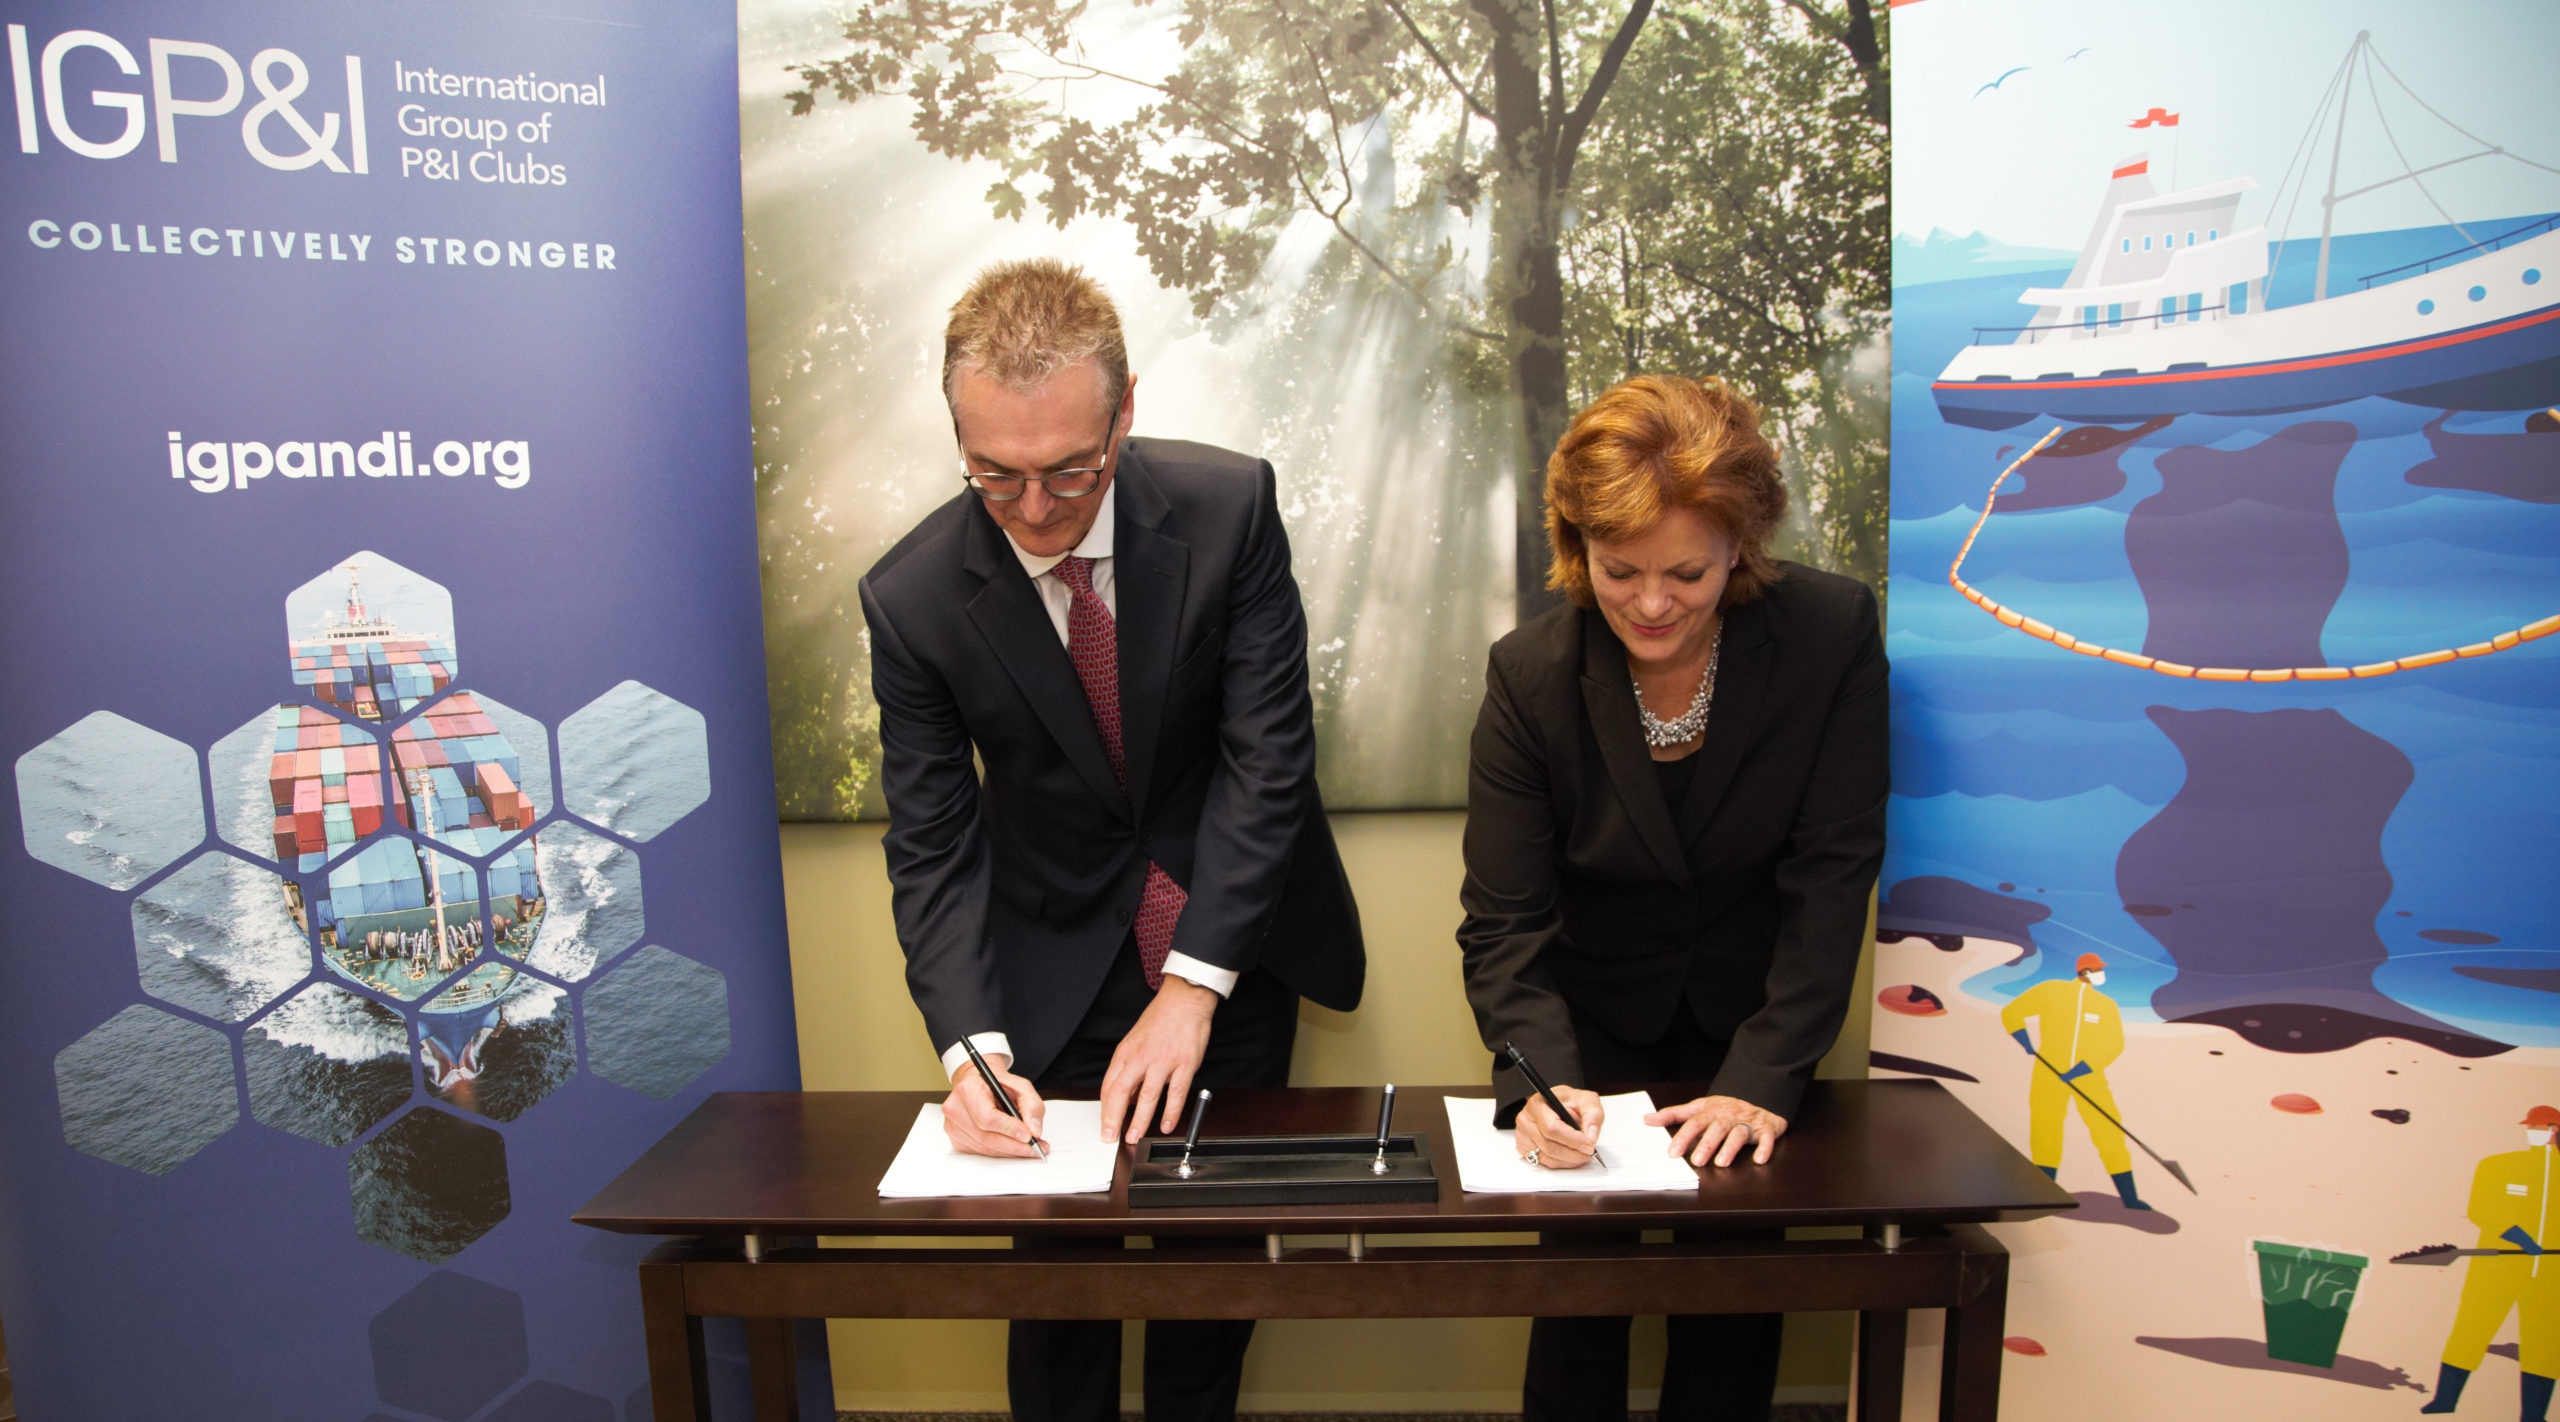 Signature of the agreement by Tony Paulson from the IGP&I and Anne Legars, Administrator of the Fund